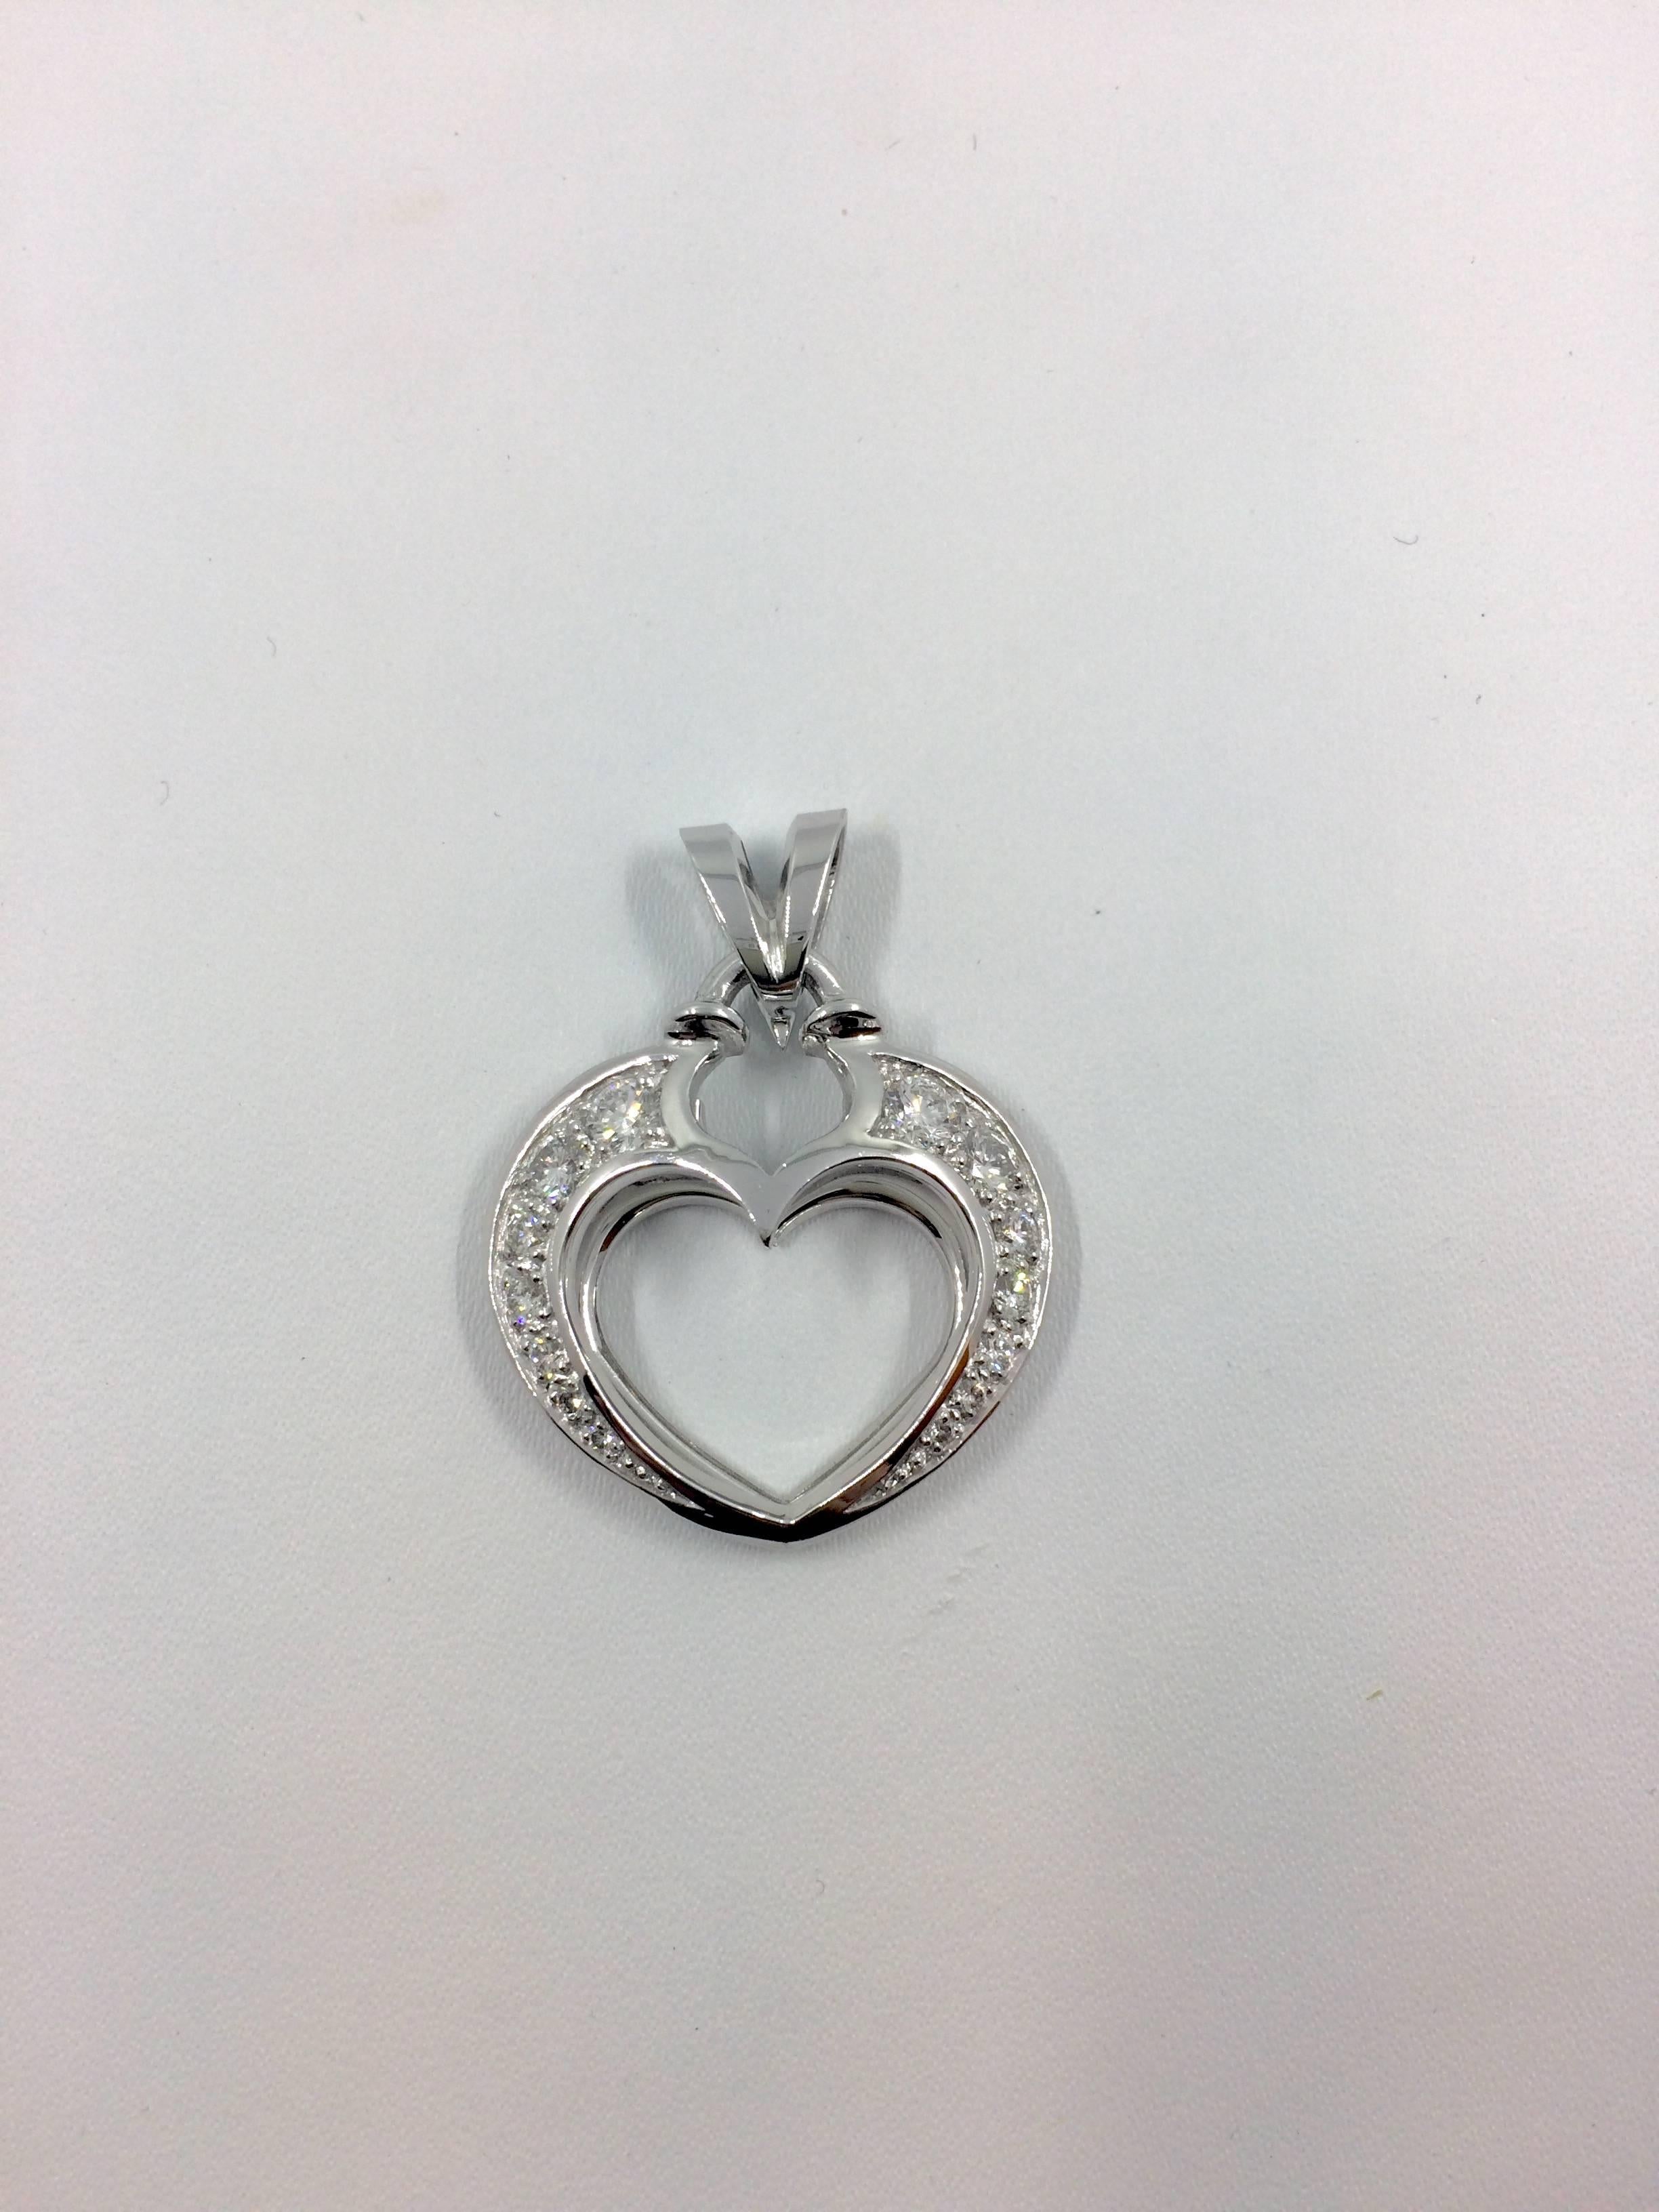 A white gold open heart pendant set with 14 brilliant cut diamonds. 
The pendant is an unique creation entirely handmade.
Total Diamonds Weight: 1.04 carat.
Diamonds Quality: E - F / VVS.
Net Weight: 10.06 grams.